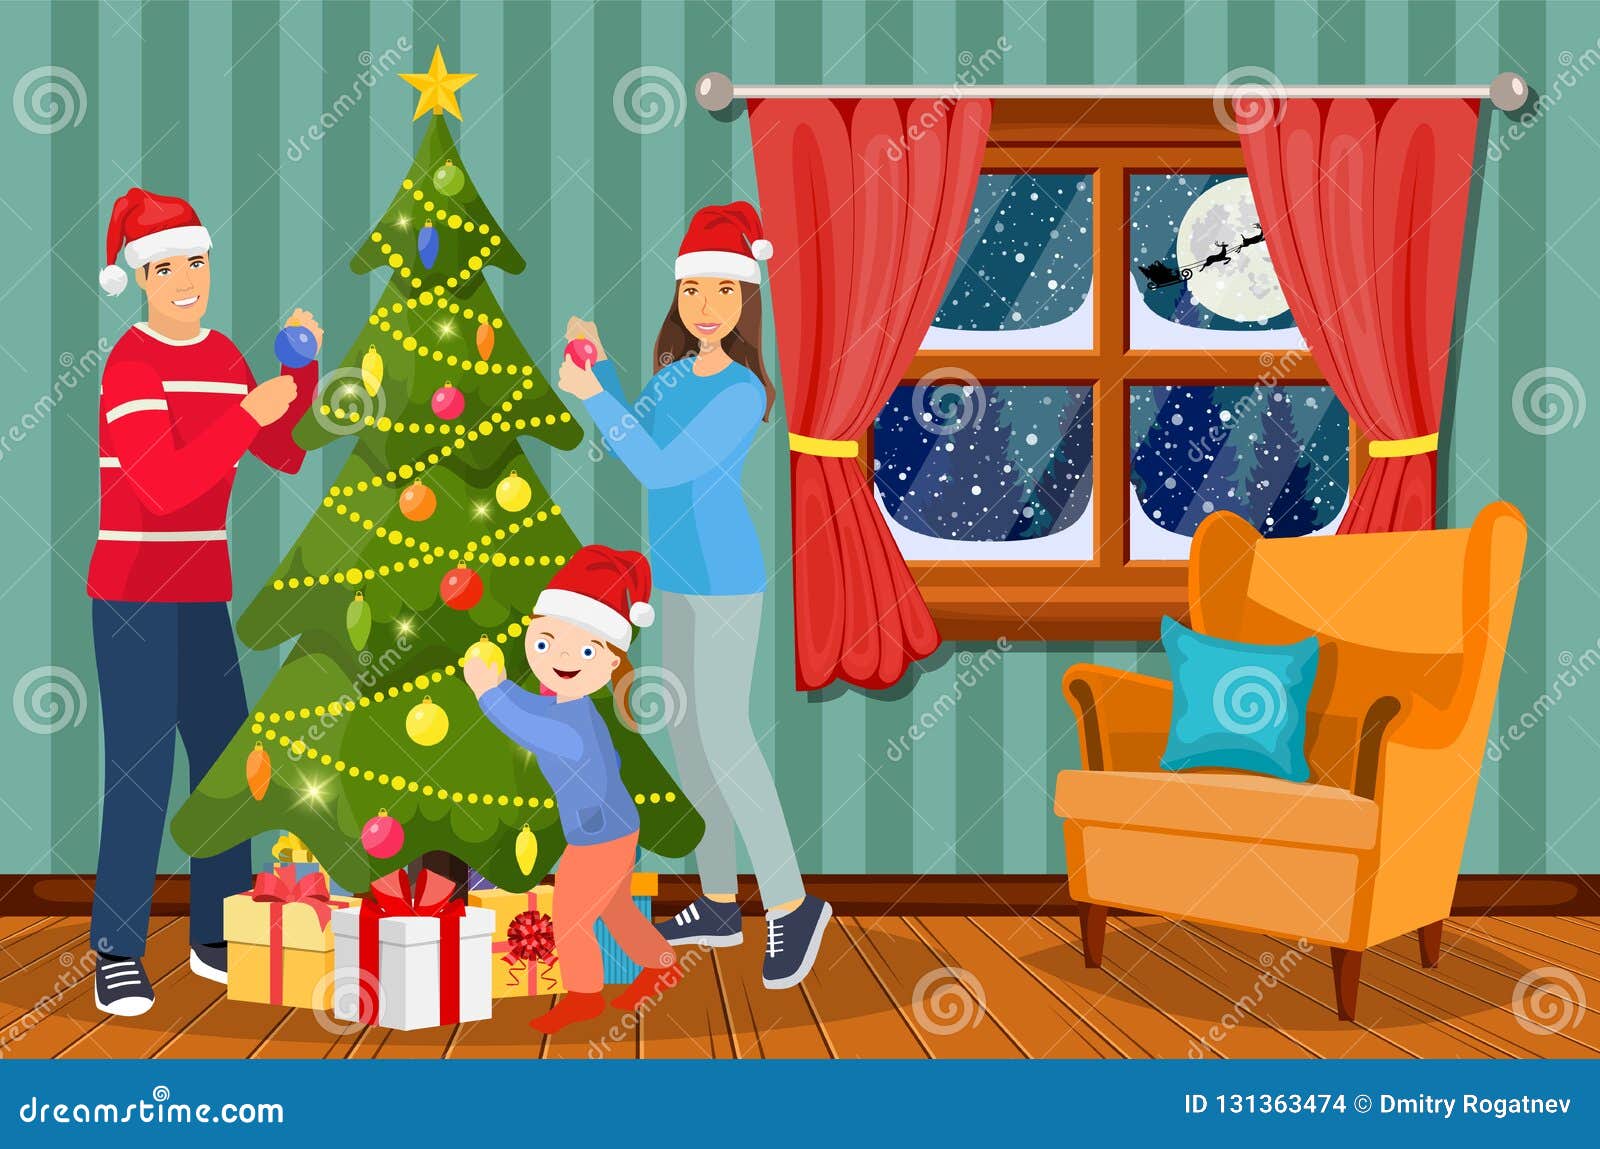 Christmas Family Problems: Over 46 Royalty-Free Licensable Stock  Illustrations & Drawings | Shutterstock